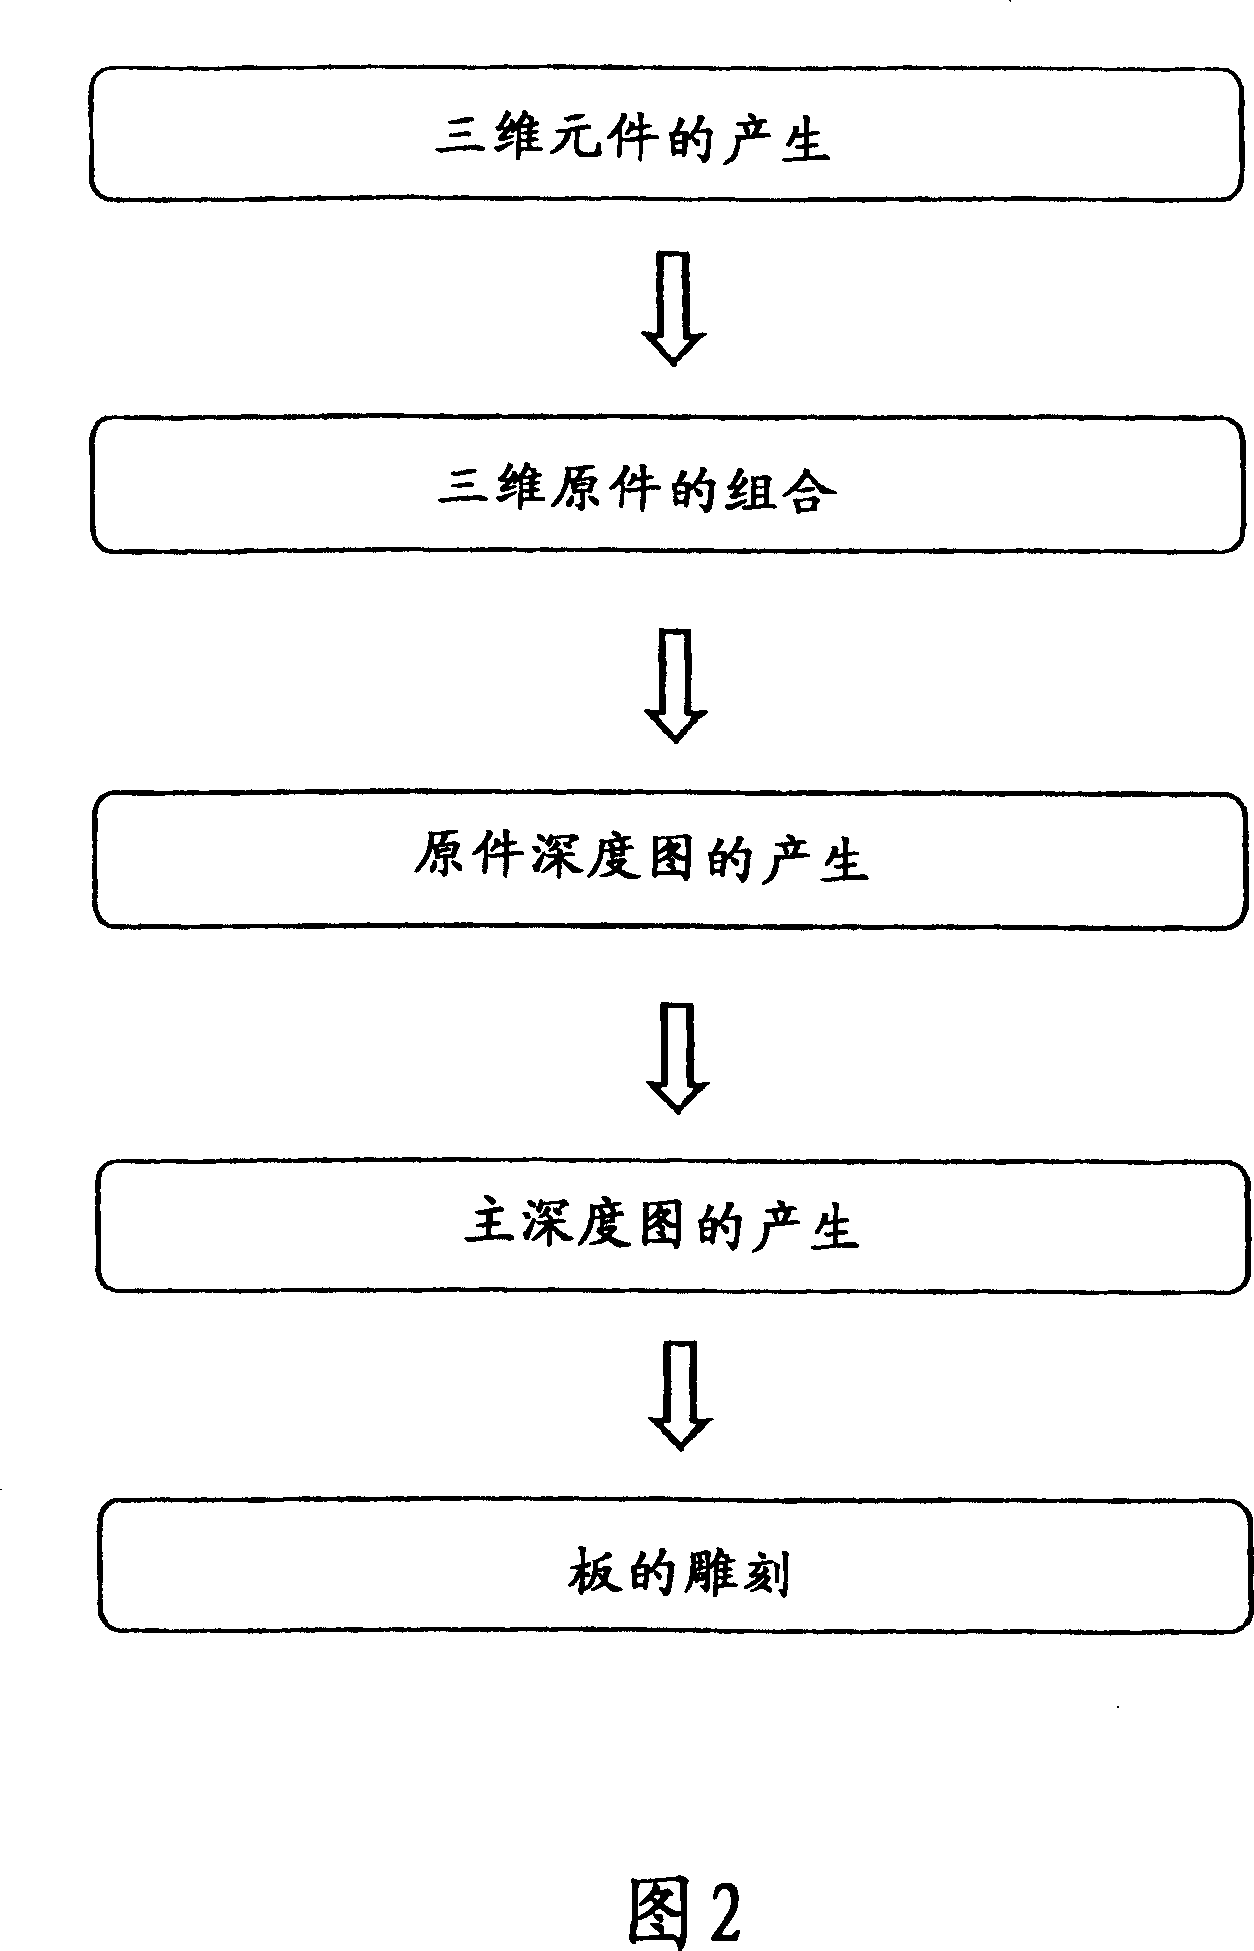 Method of manufacturing an engraved plate